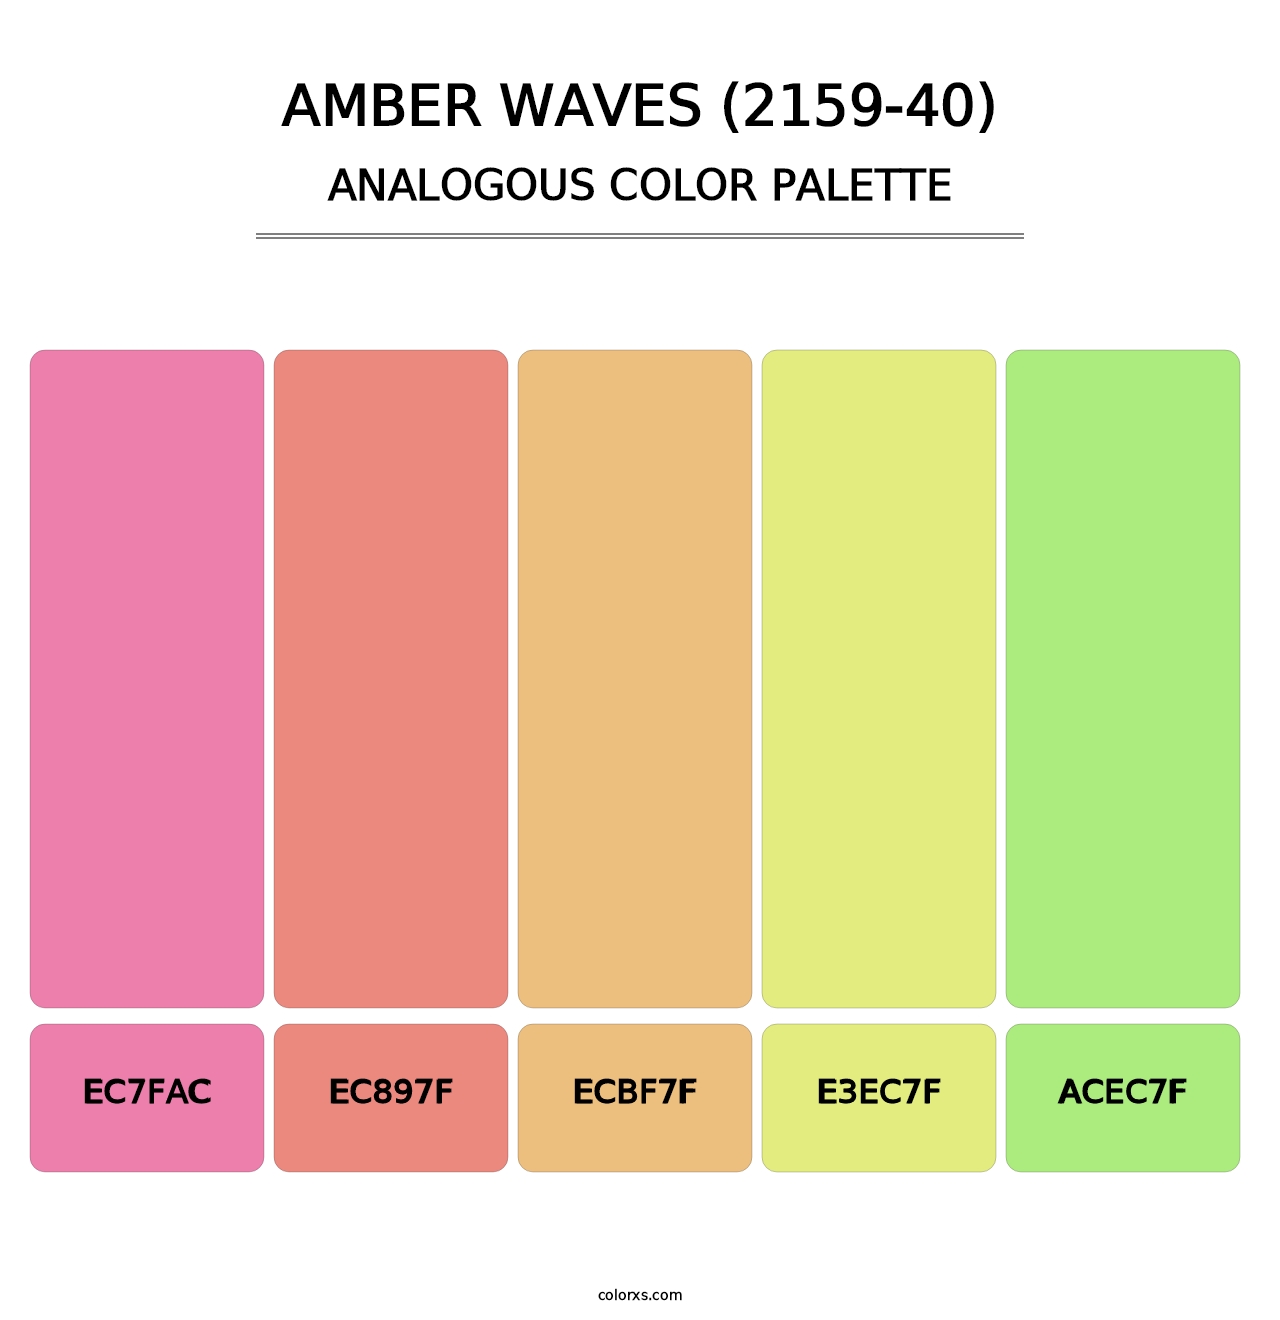 Amber Waves (2159-40) - Analogous Color Palette